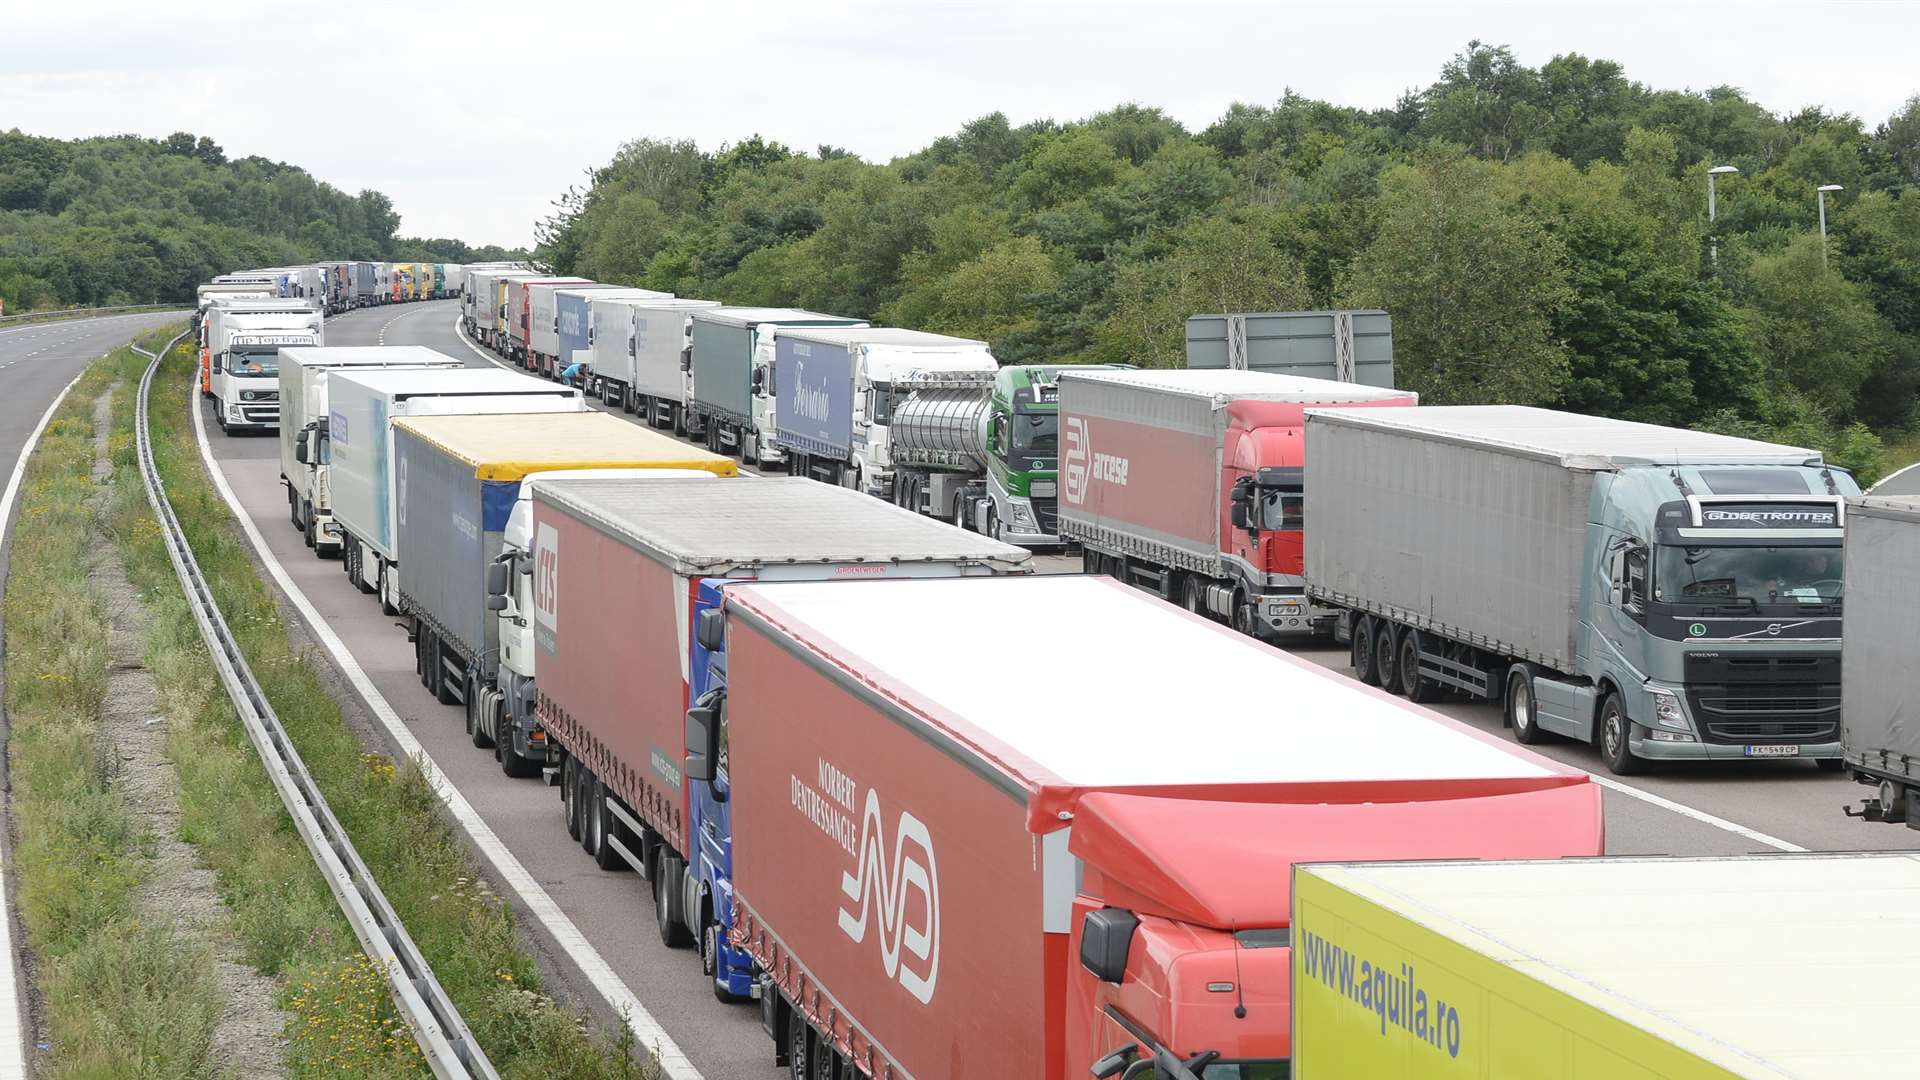 Operation Stack on the M20, July 2015